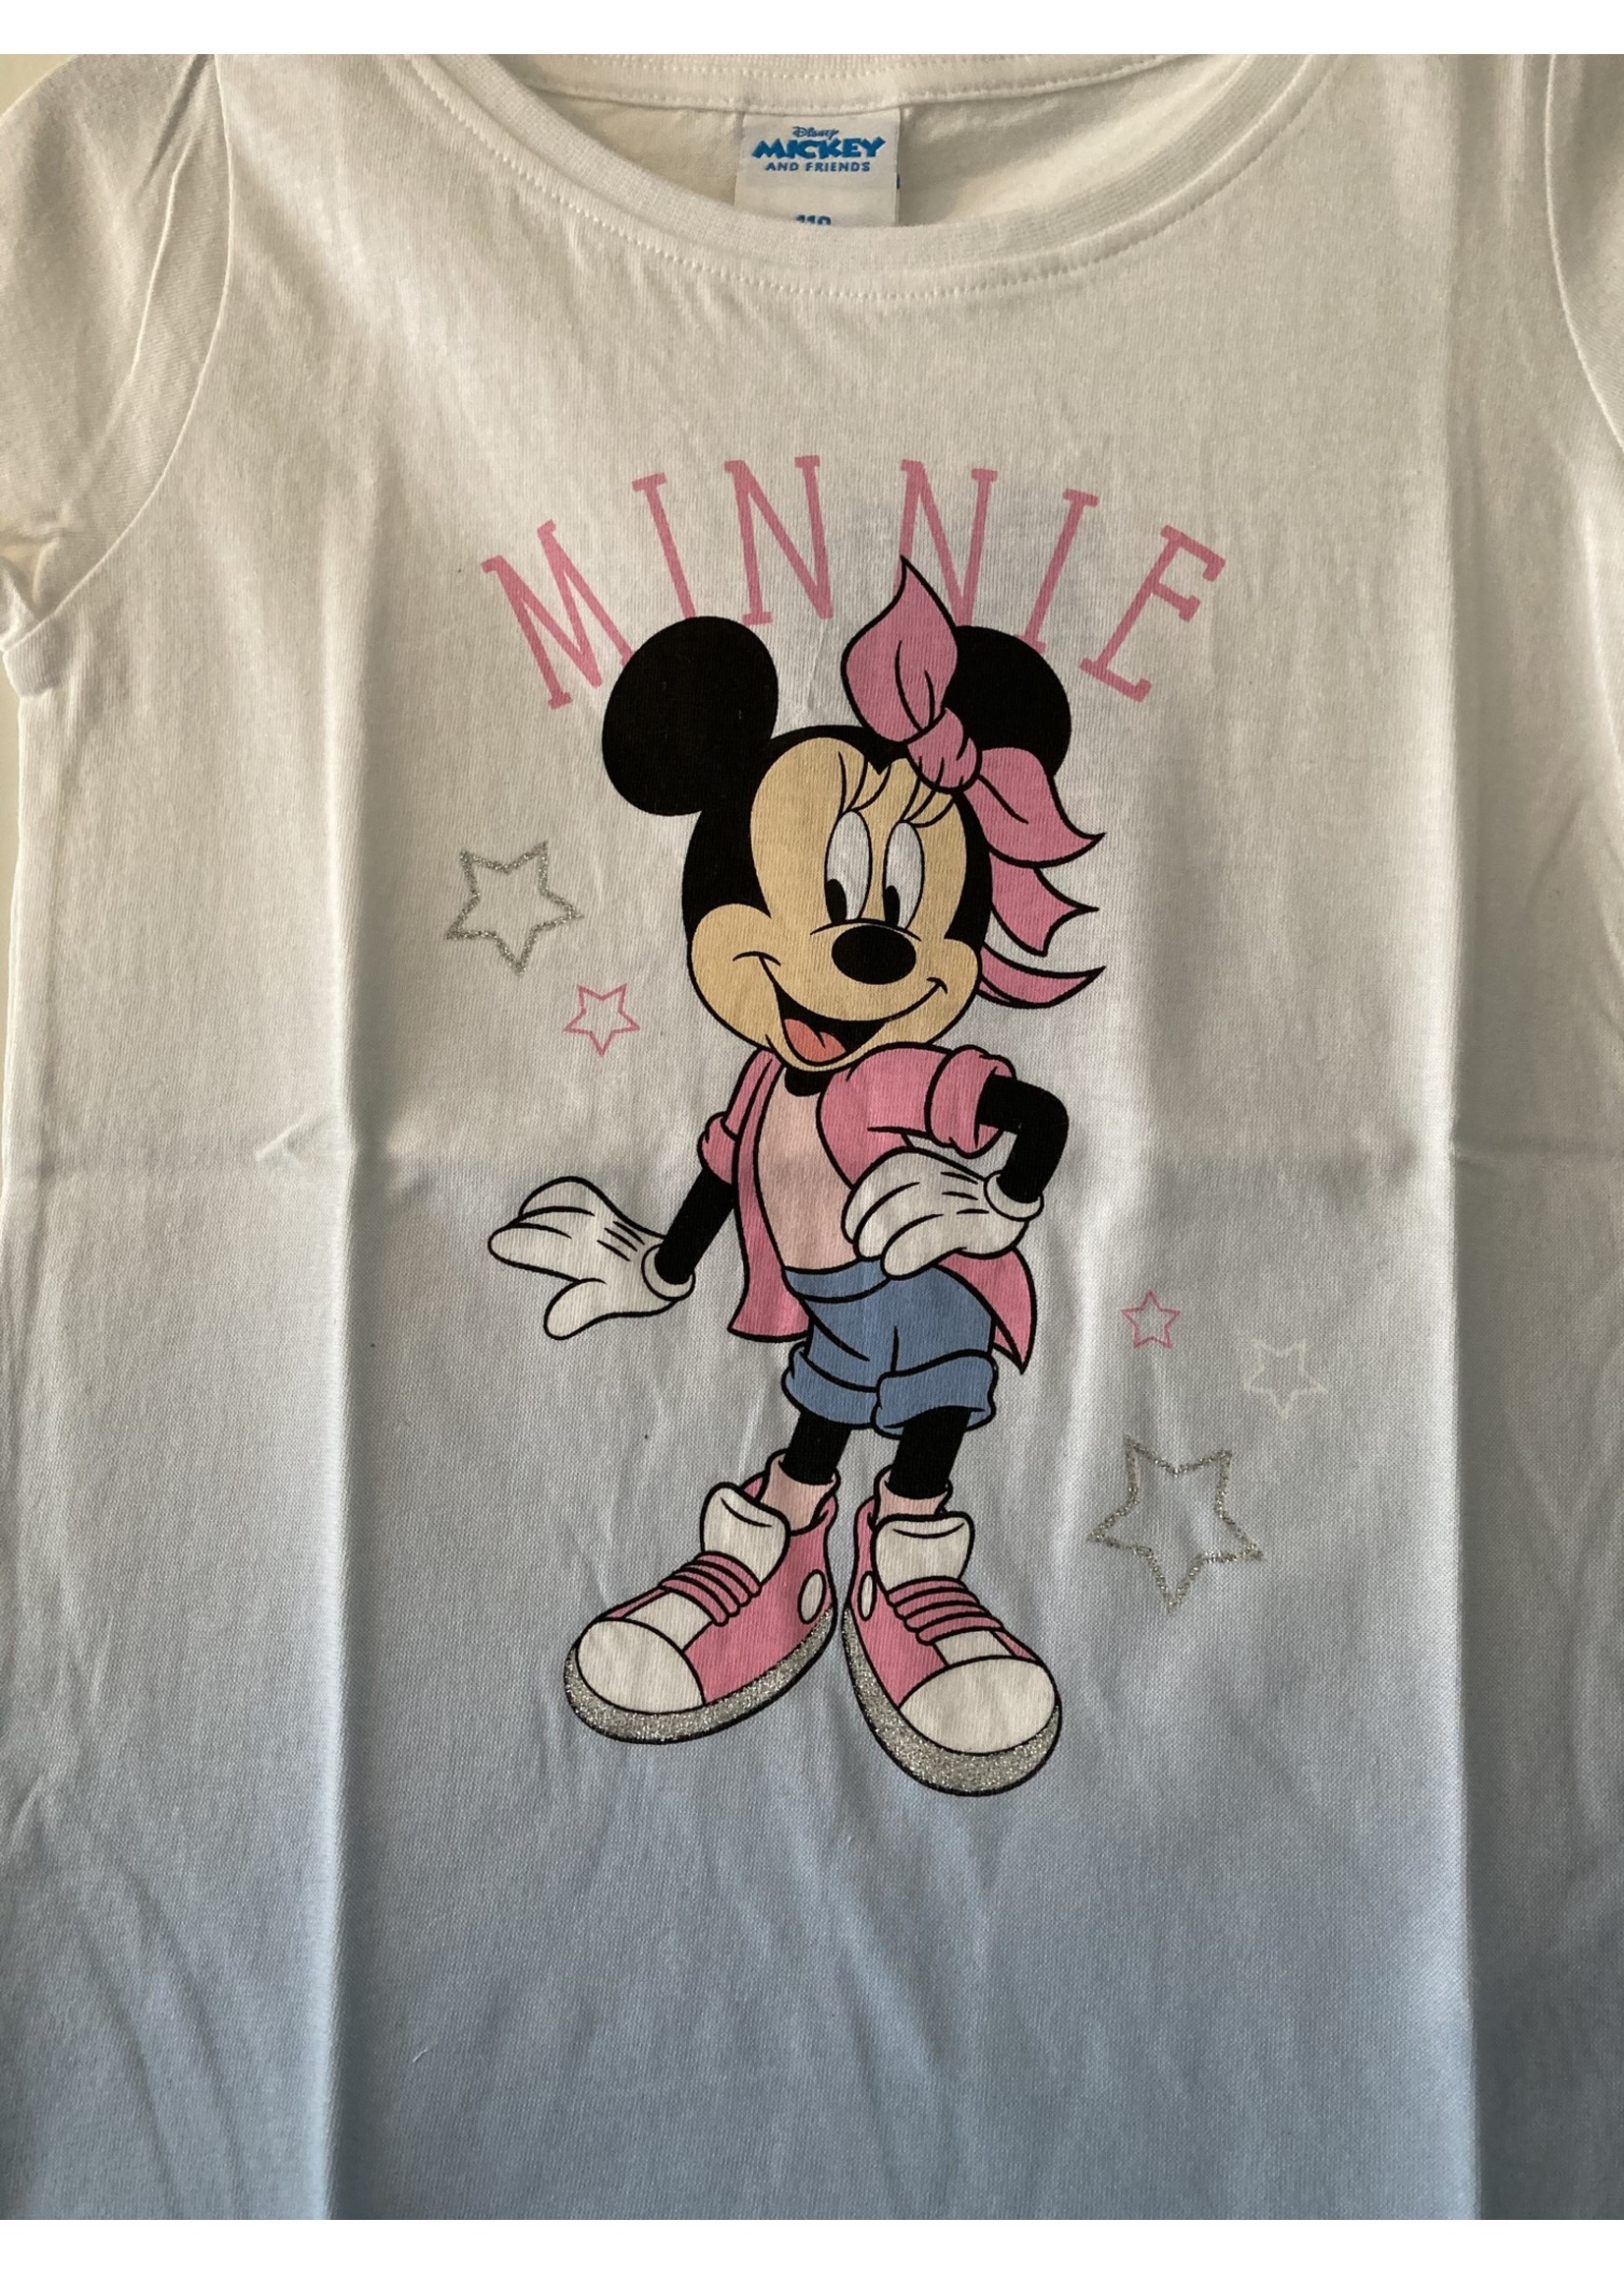 Disney Minnie Mouse T-shirt from Disney blue